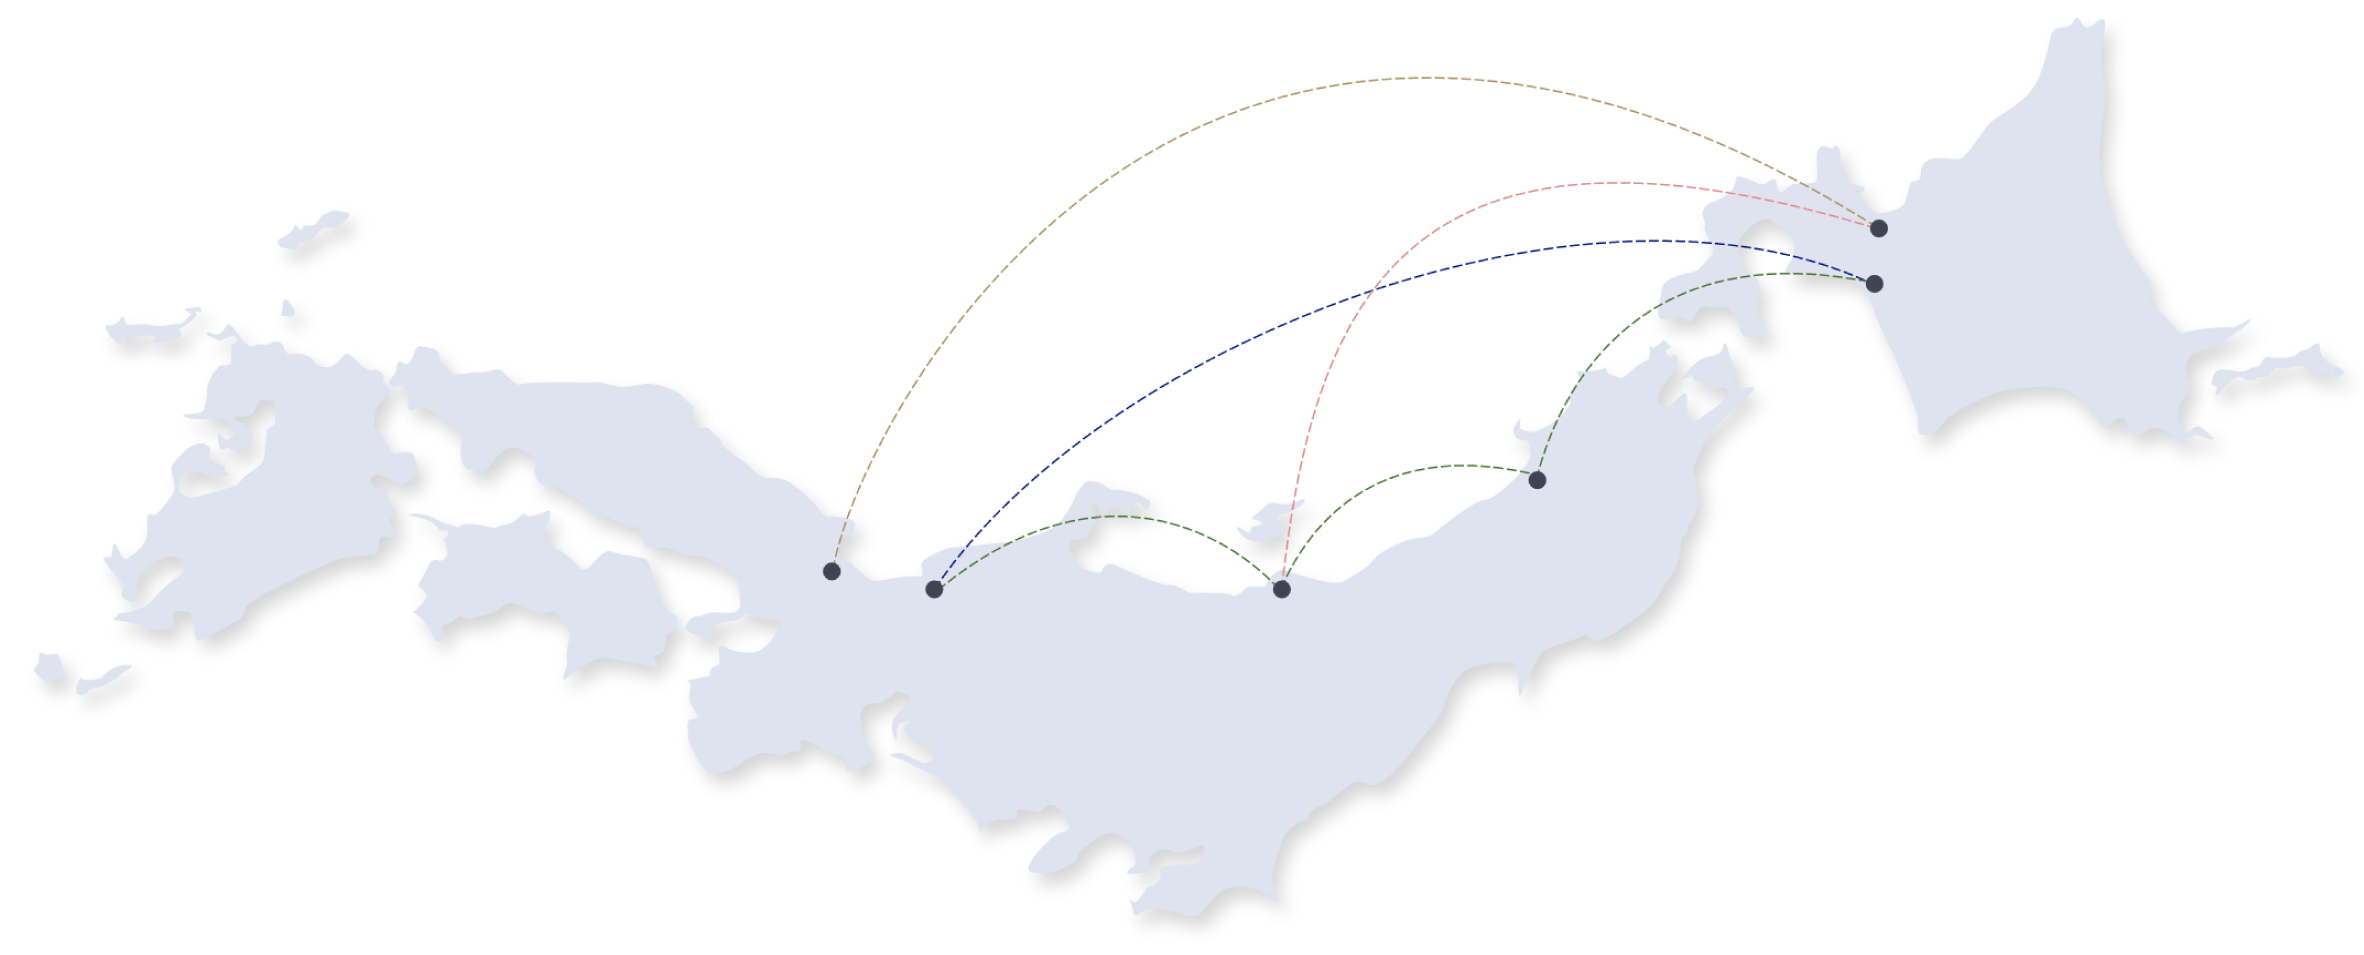 Route introduction